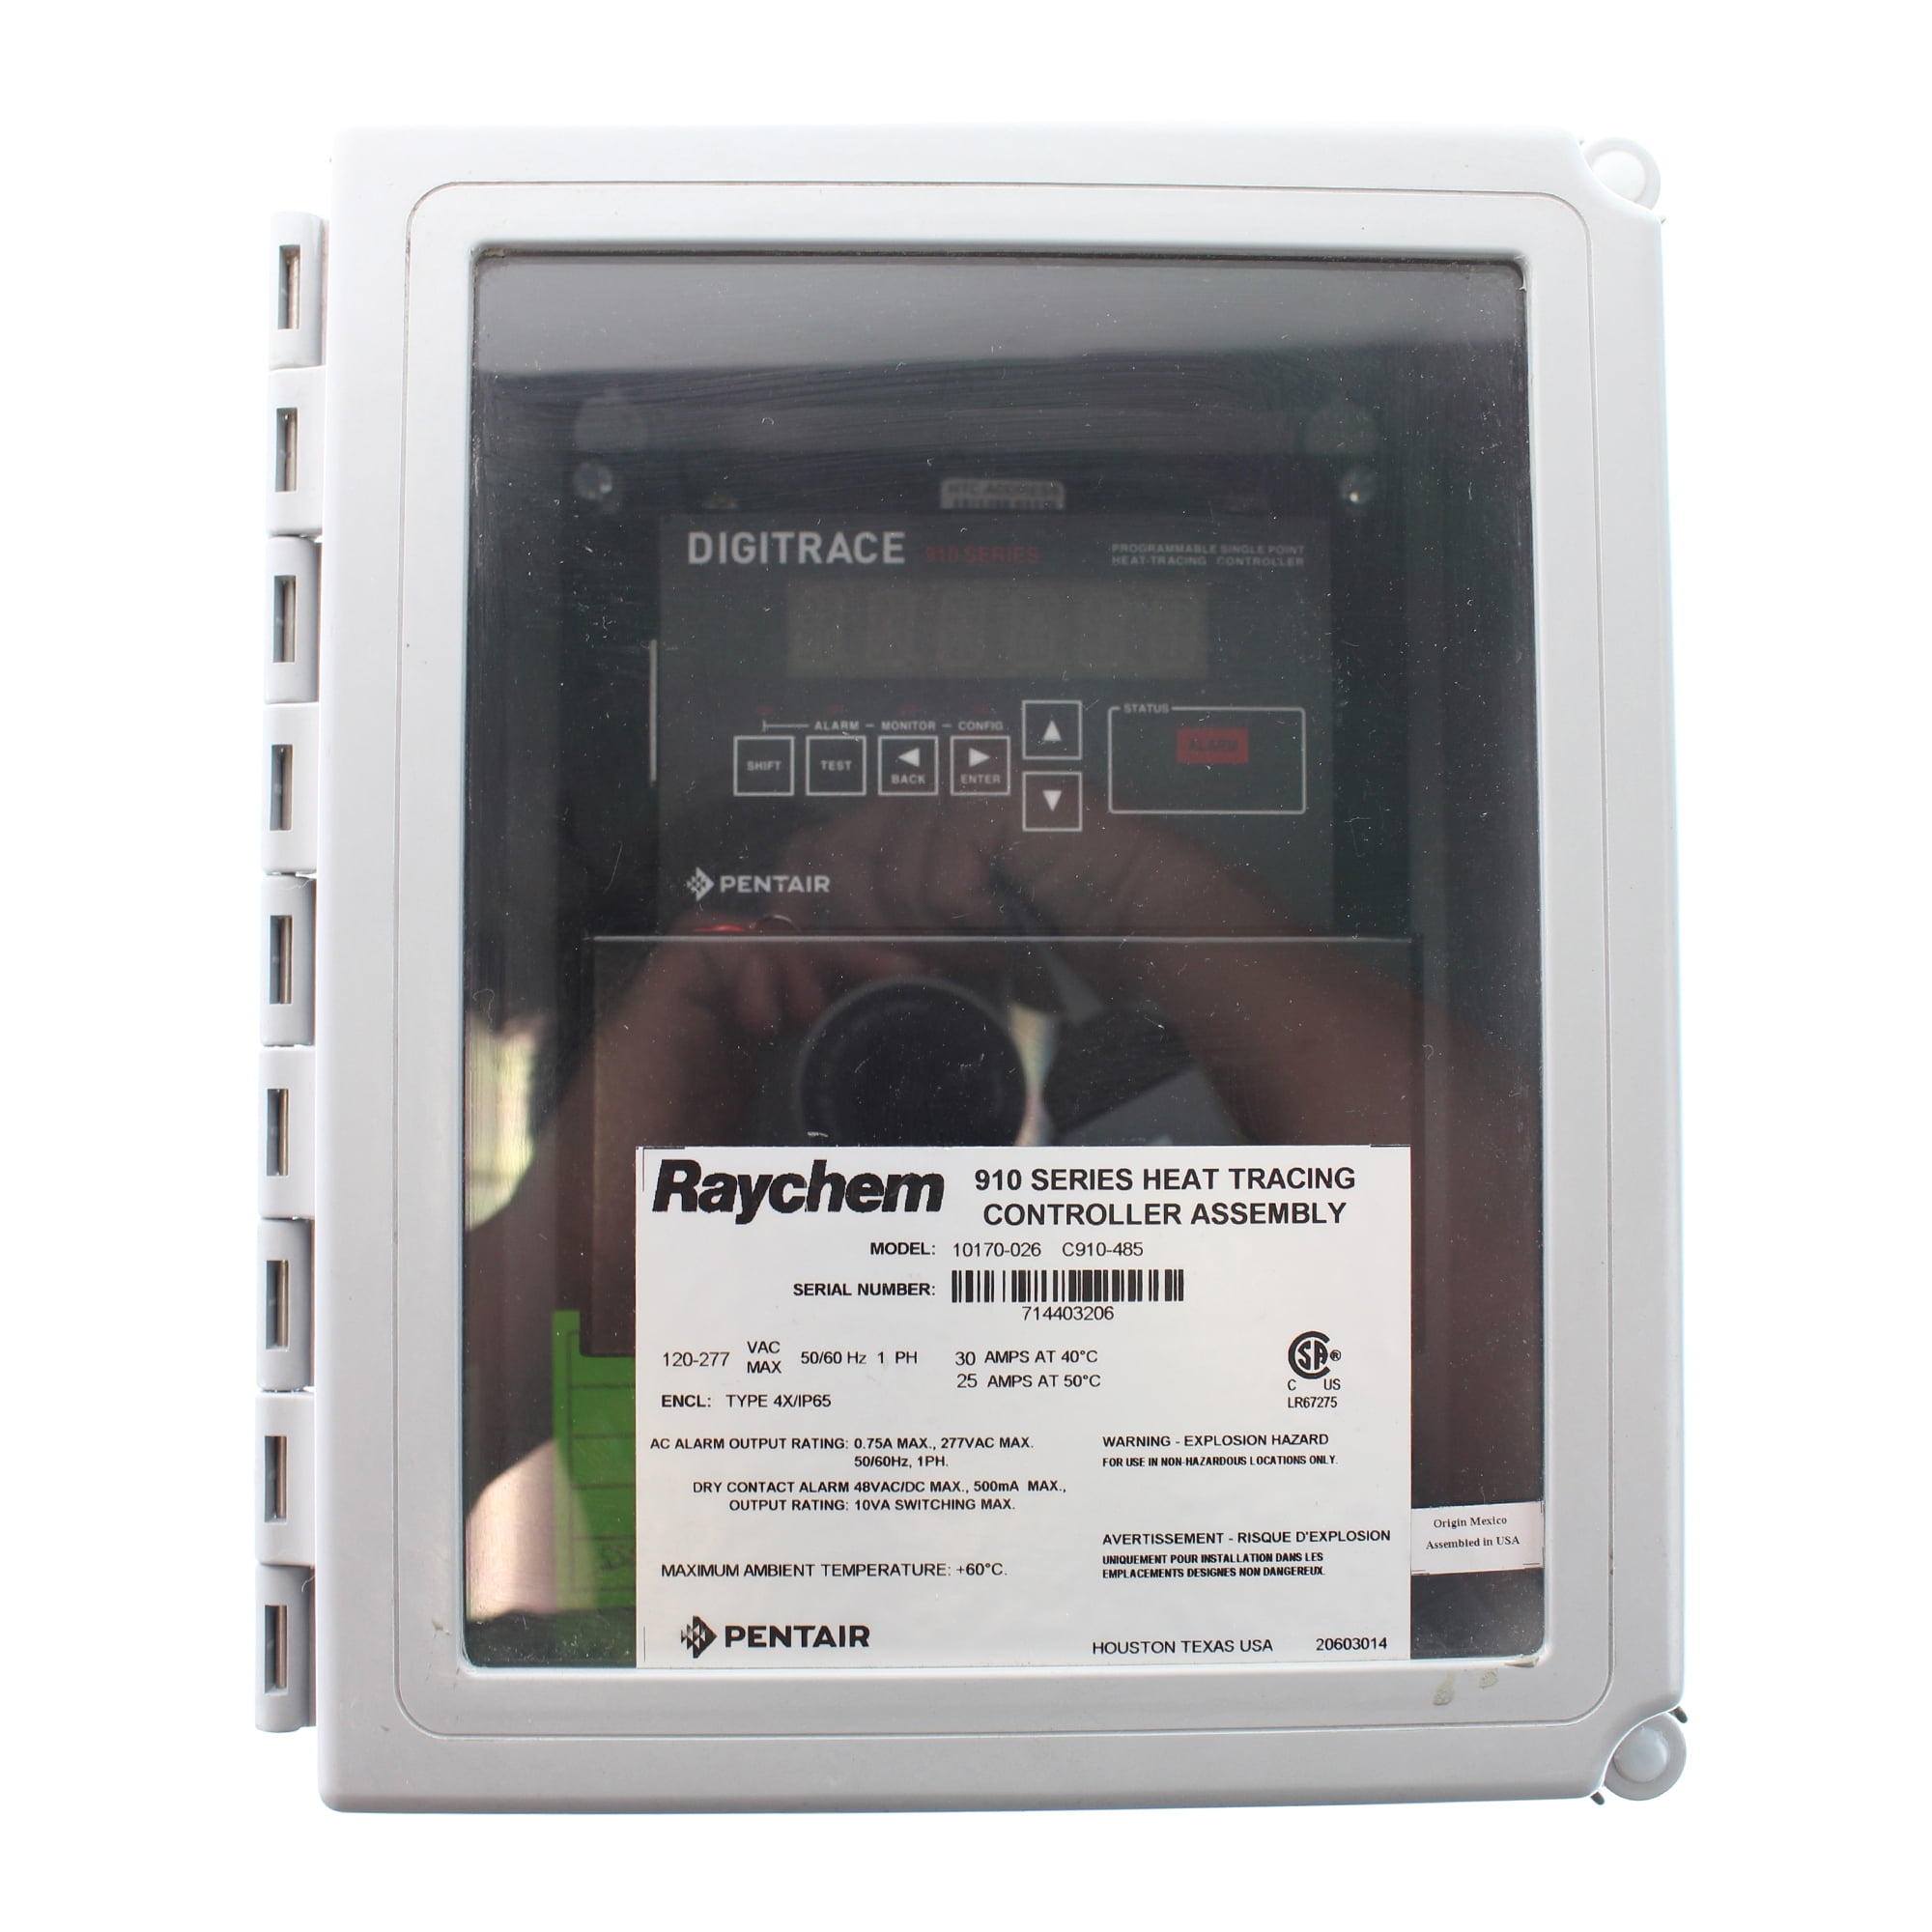 Raychem C910-485 Commercial Heating Cable Controller, 910-Series, Tracing -  Walmart.com  Pentair 910 Controller Wiring Diagram    Walmart